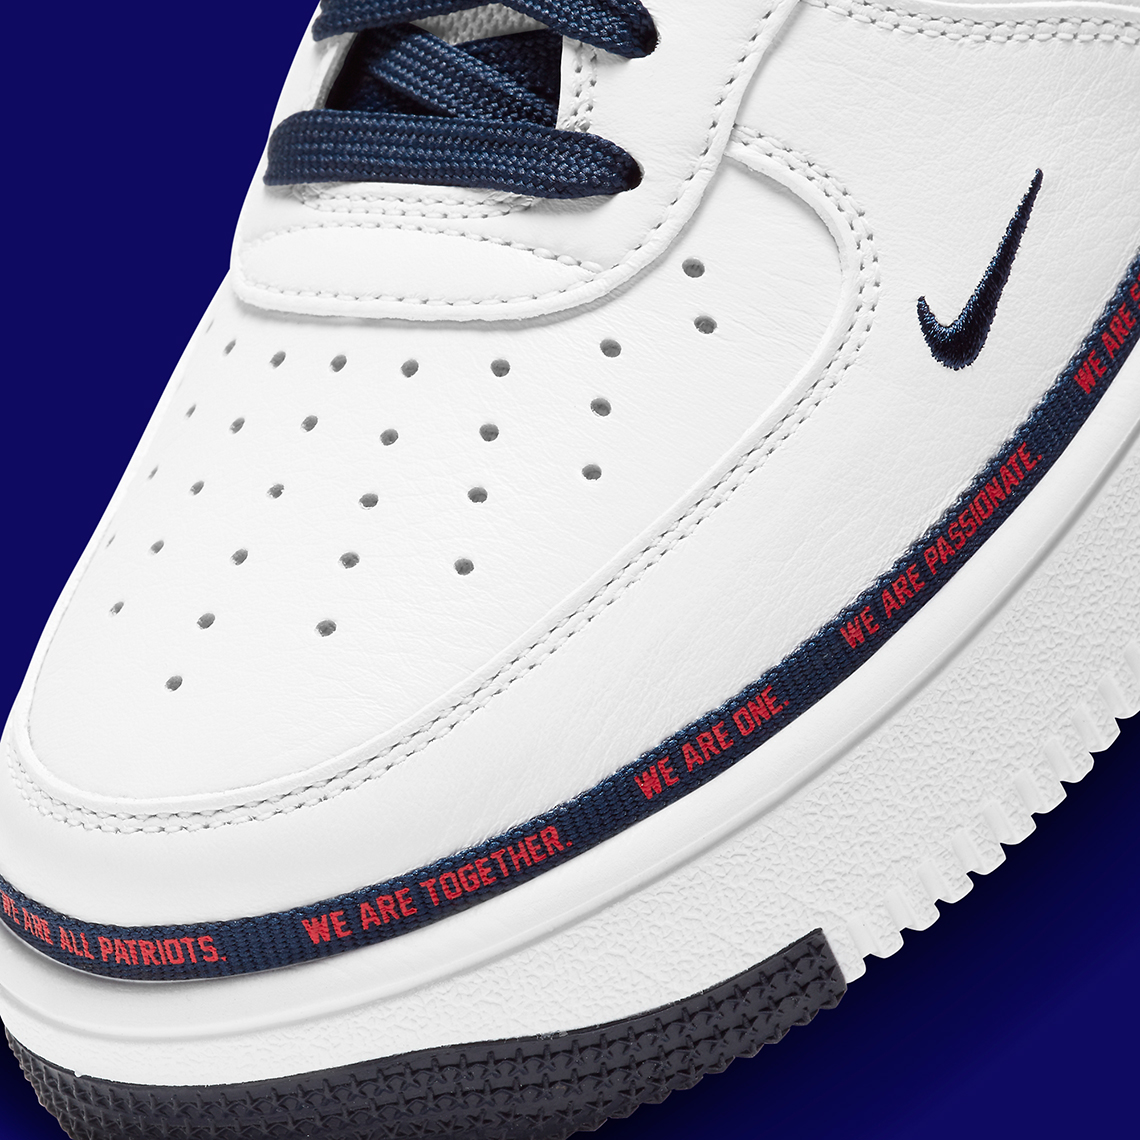 Nike Air Force 1 Low New England Patriots Db6316 100 5